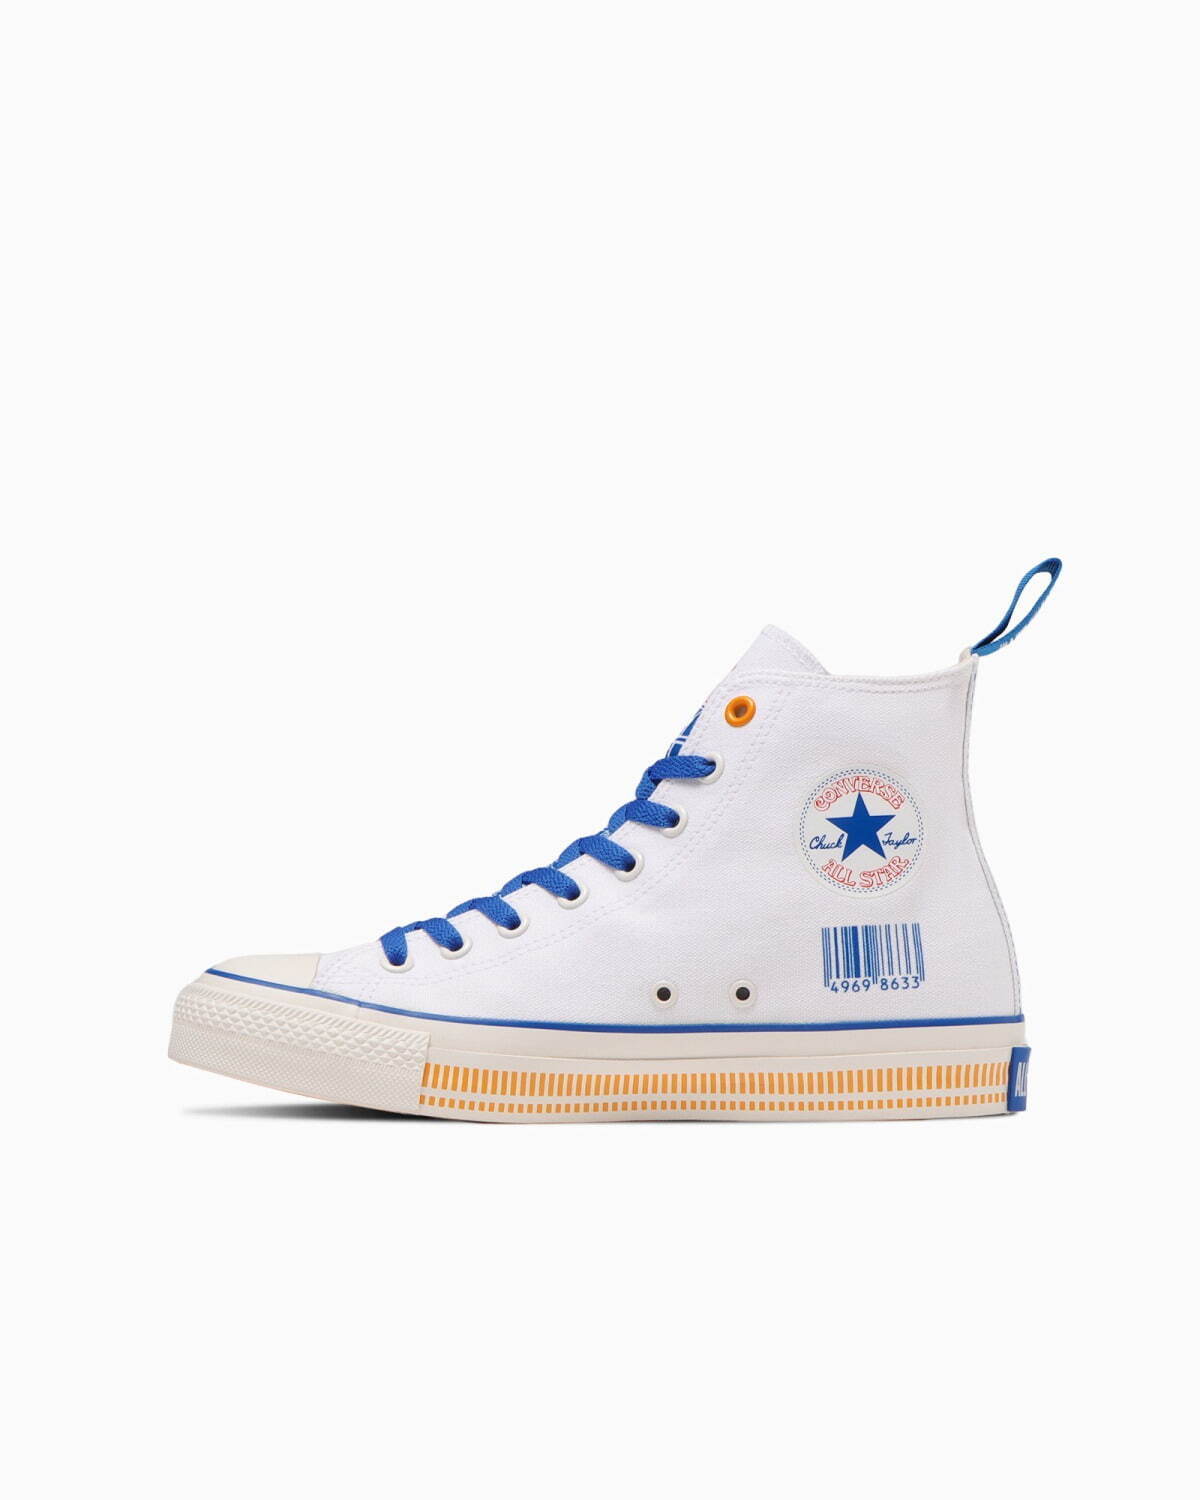 Converse x Nissin Cup Noodles Sneakers